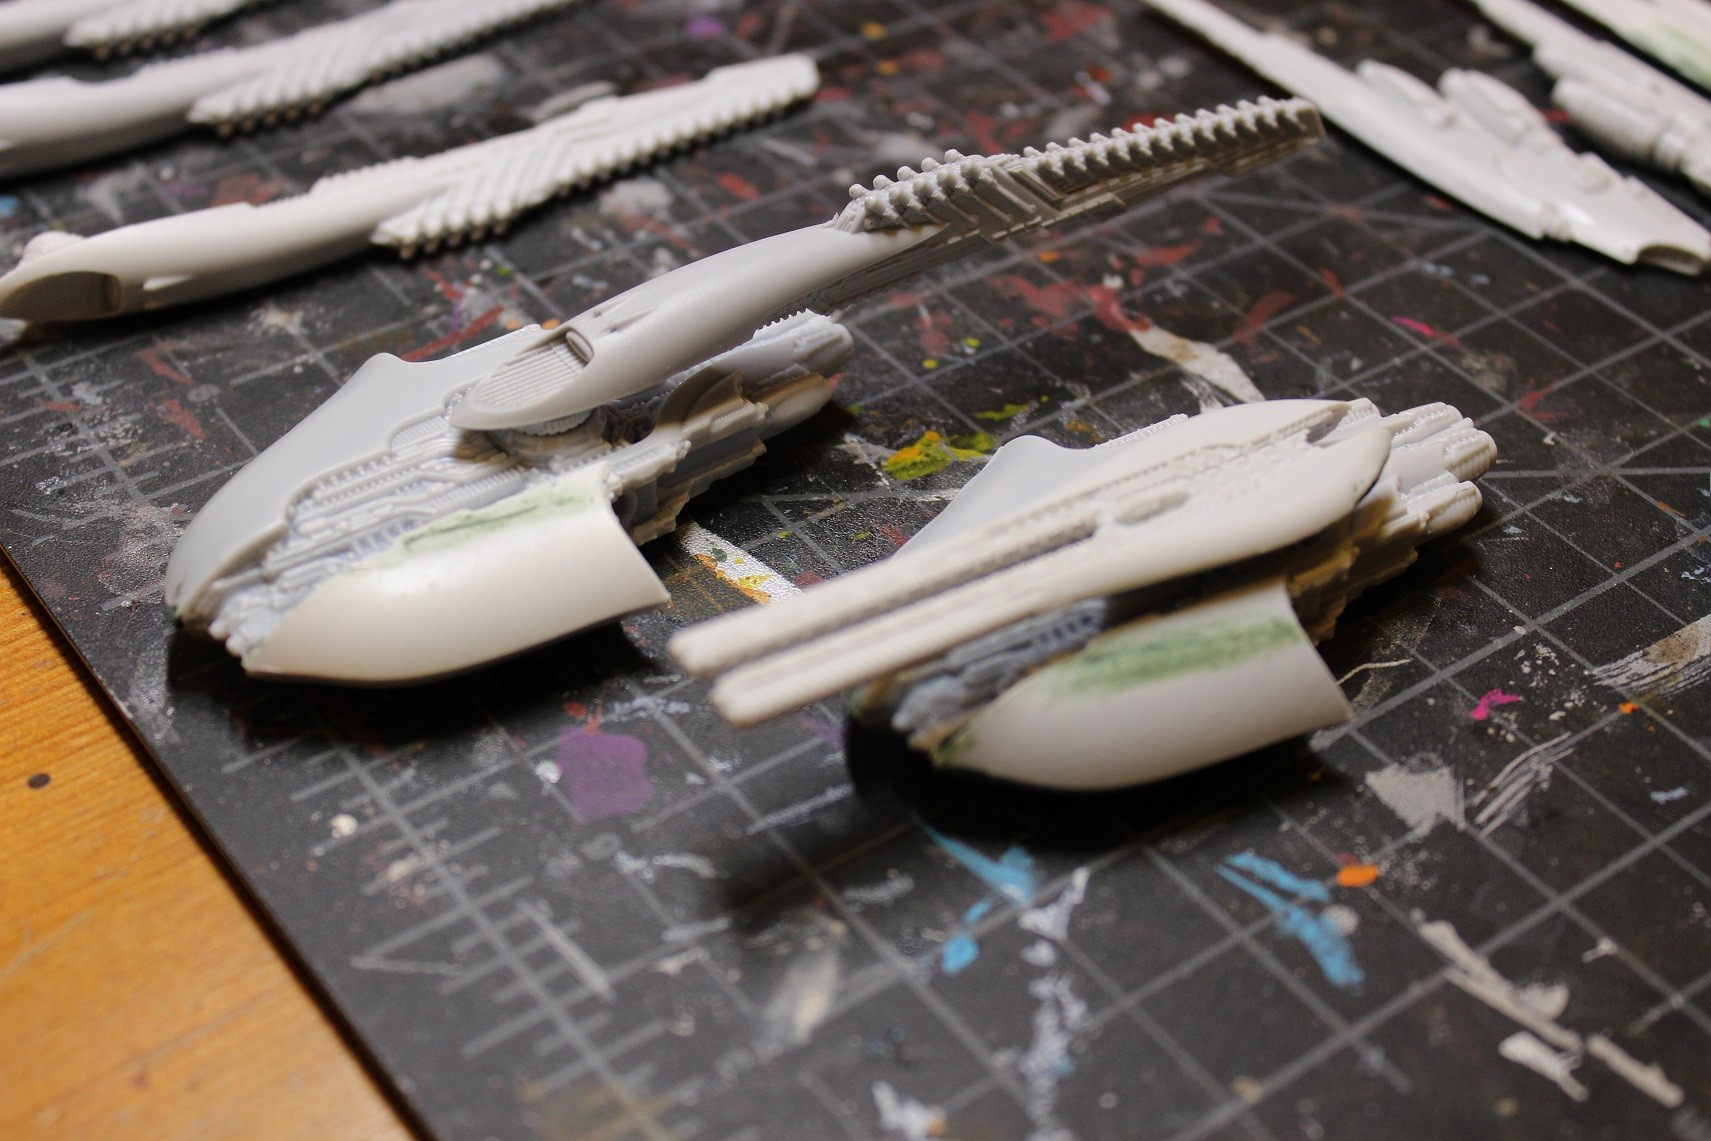 WIP: Scourge army and PHR fleet